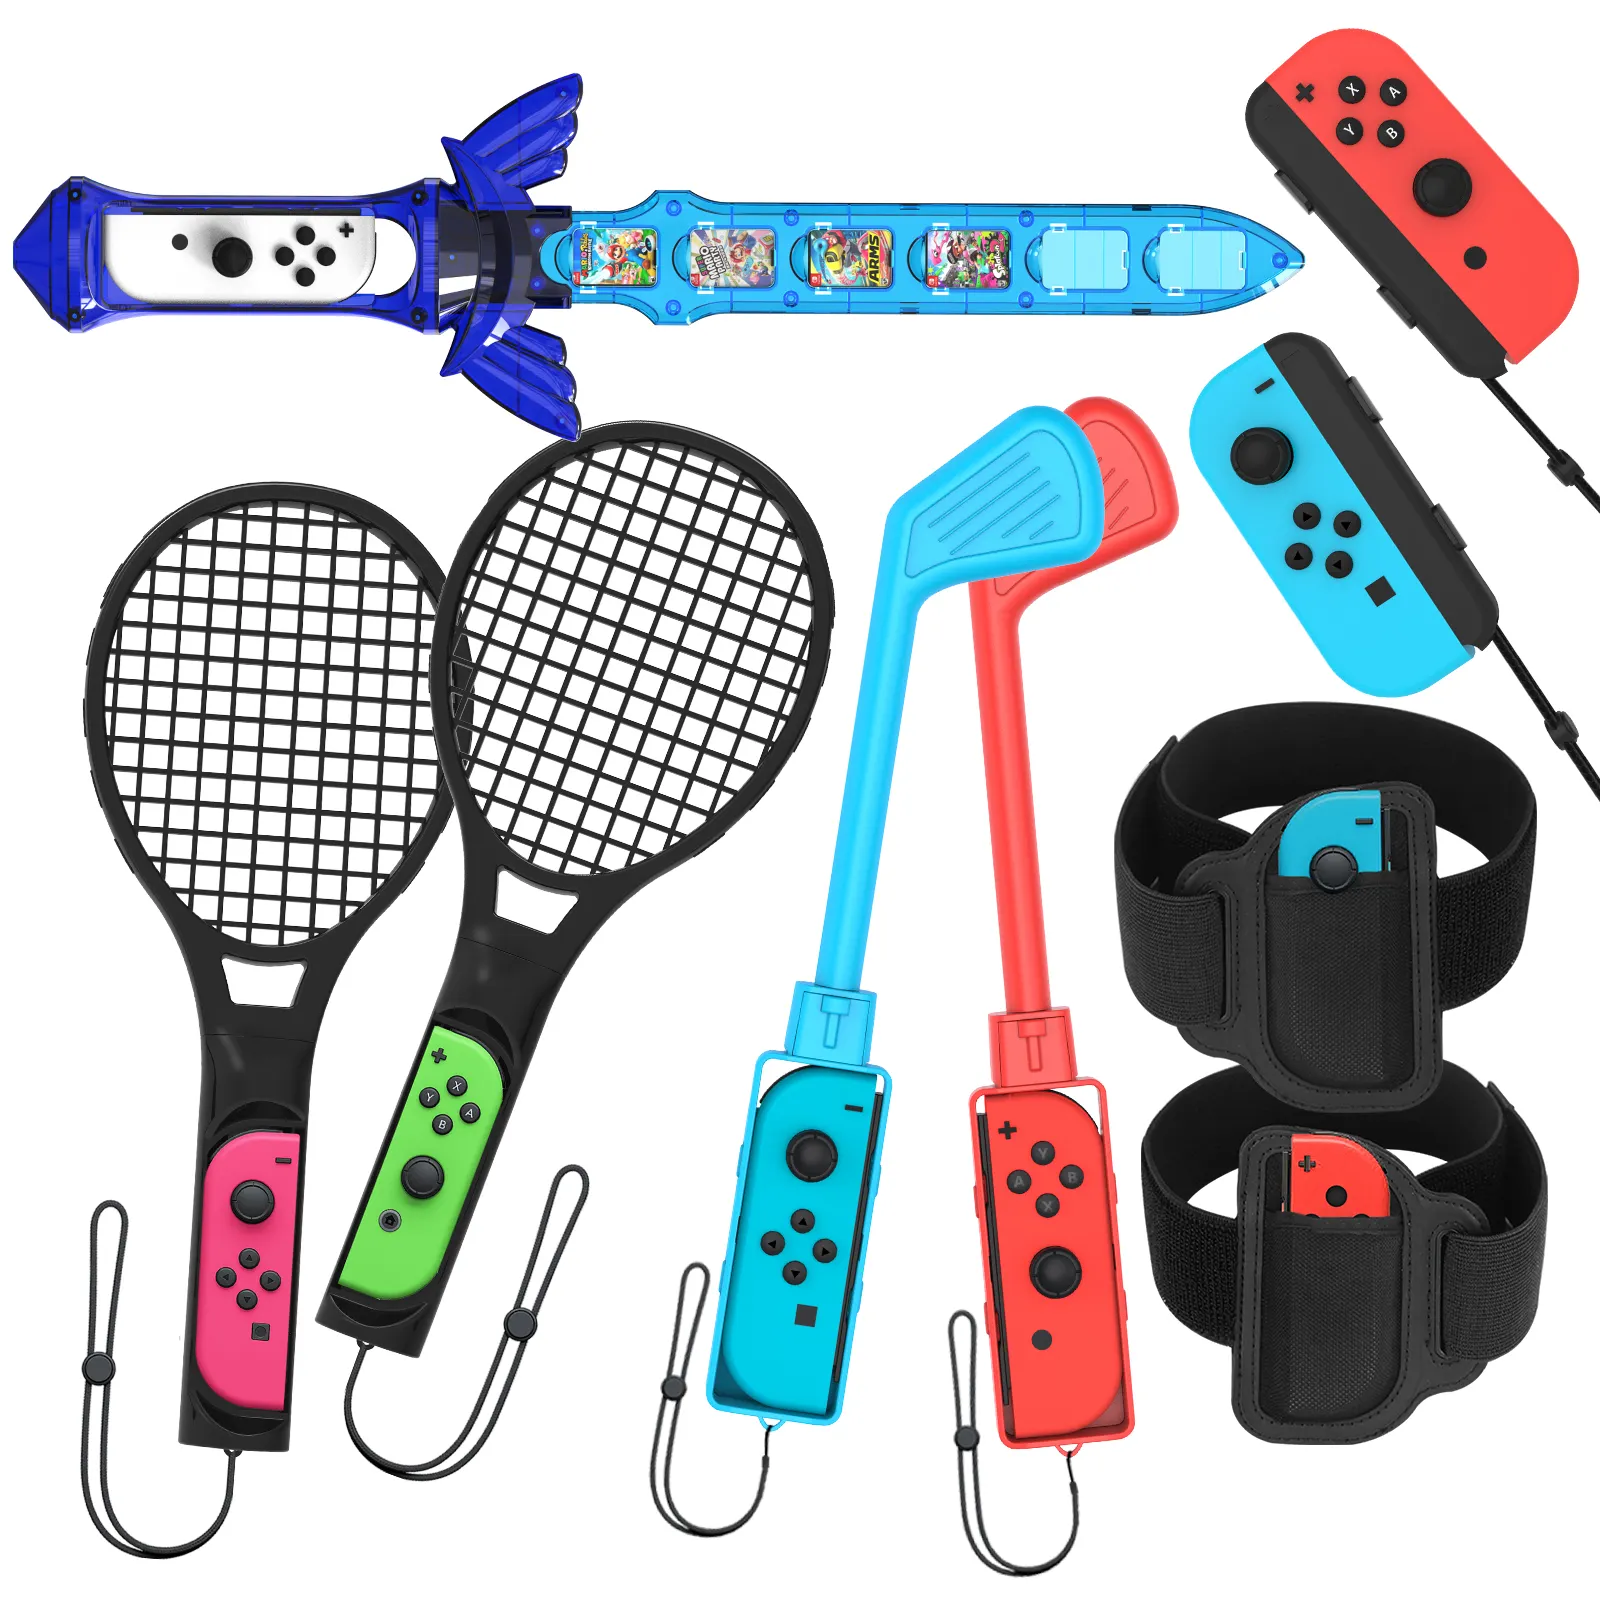 9 in 1 Game Accessories Sports Bundles for Nintendo Switch Sports